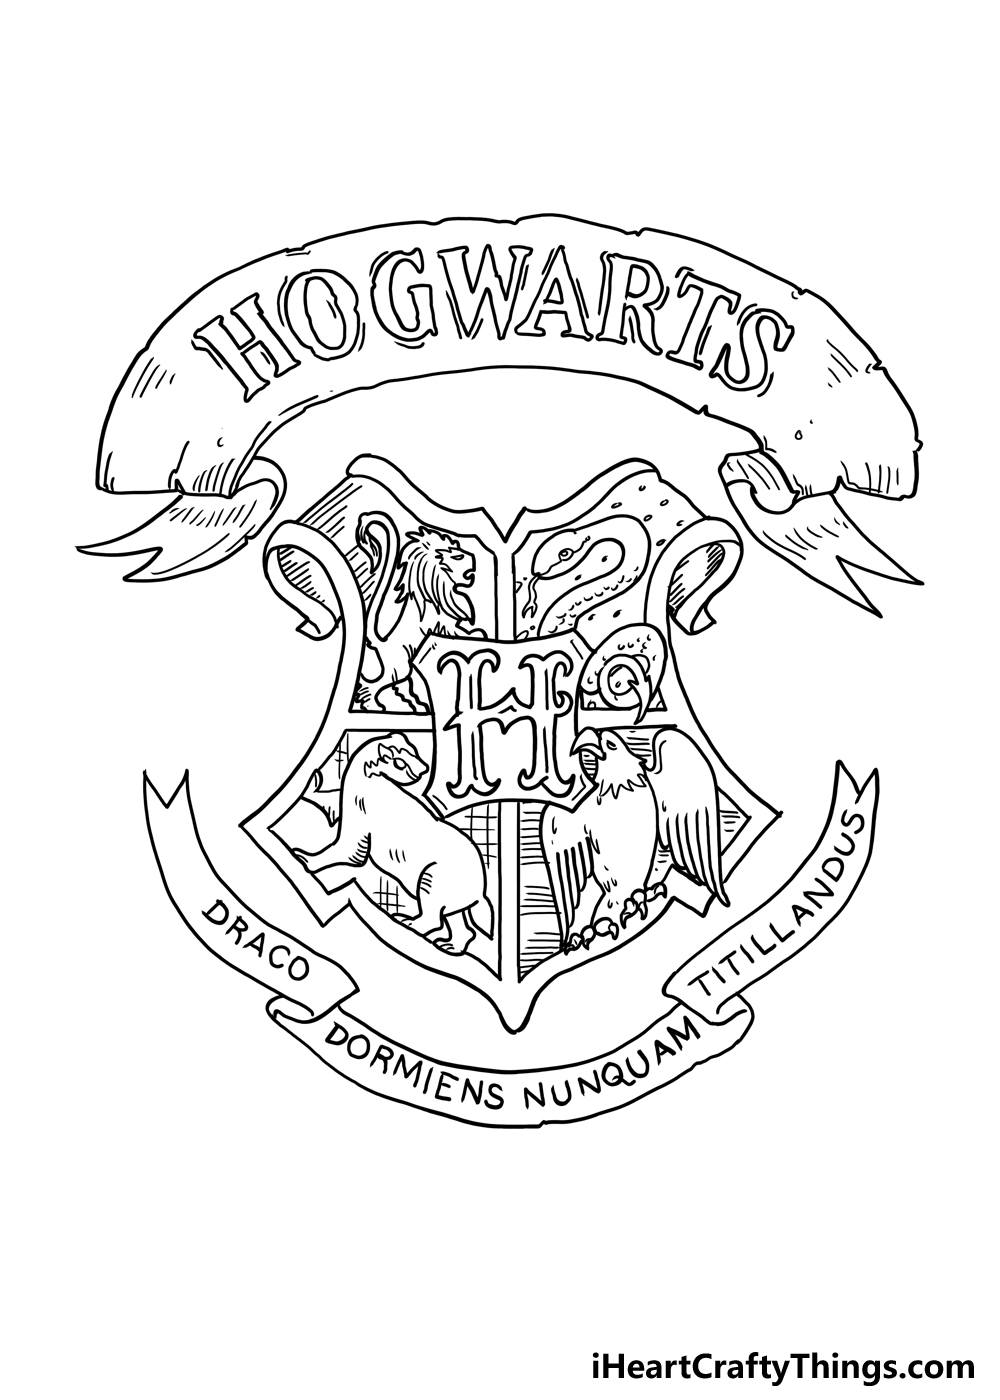 How to Draw the Hogwarts Crest step 5